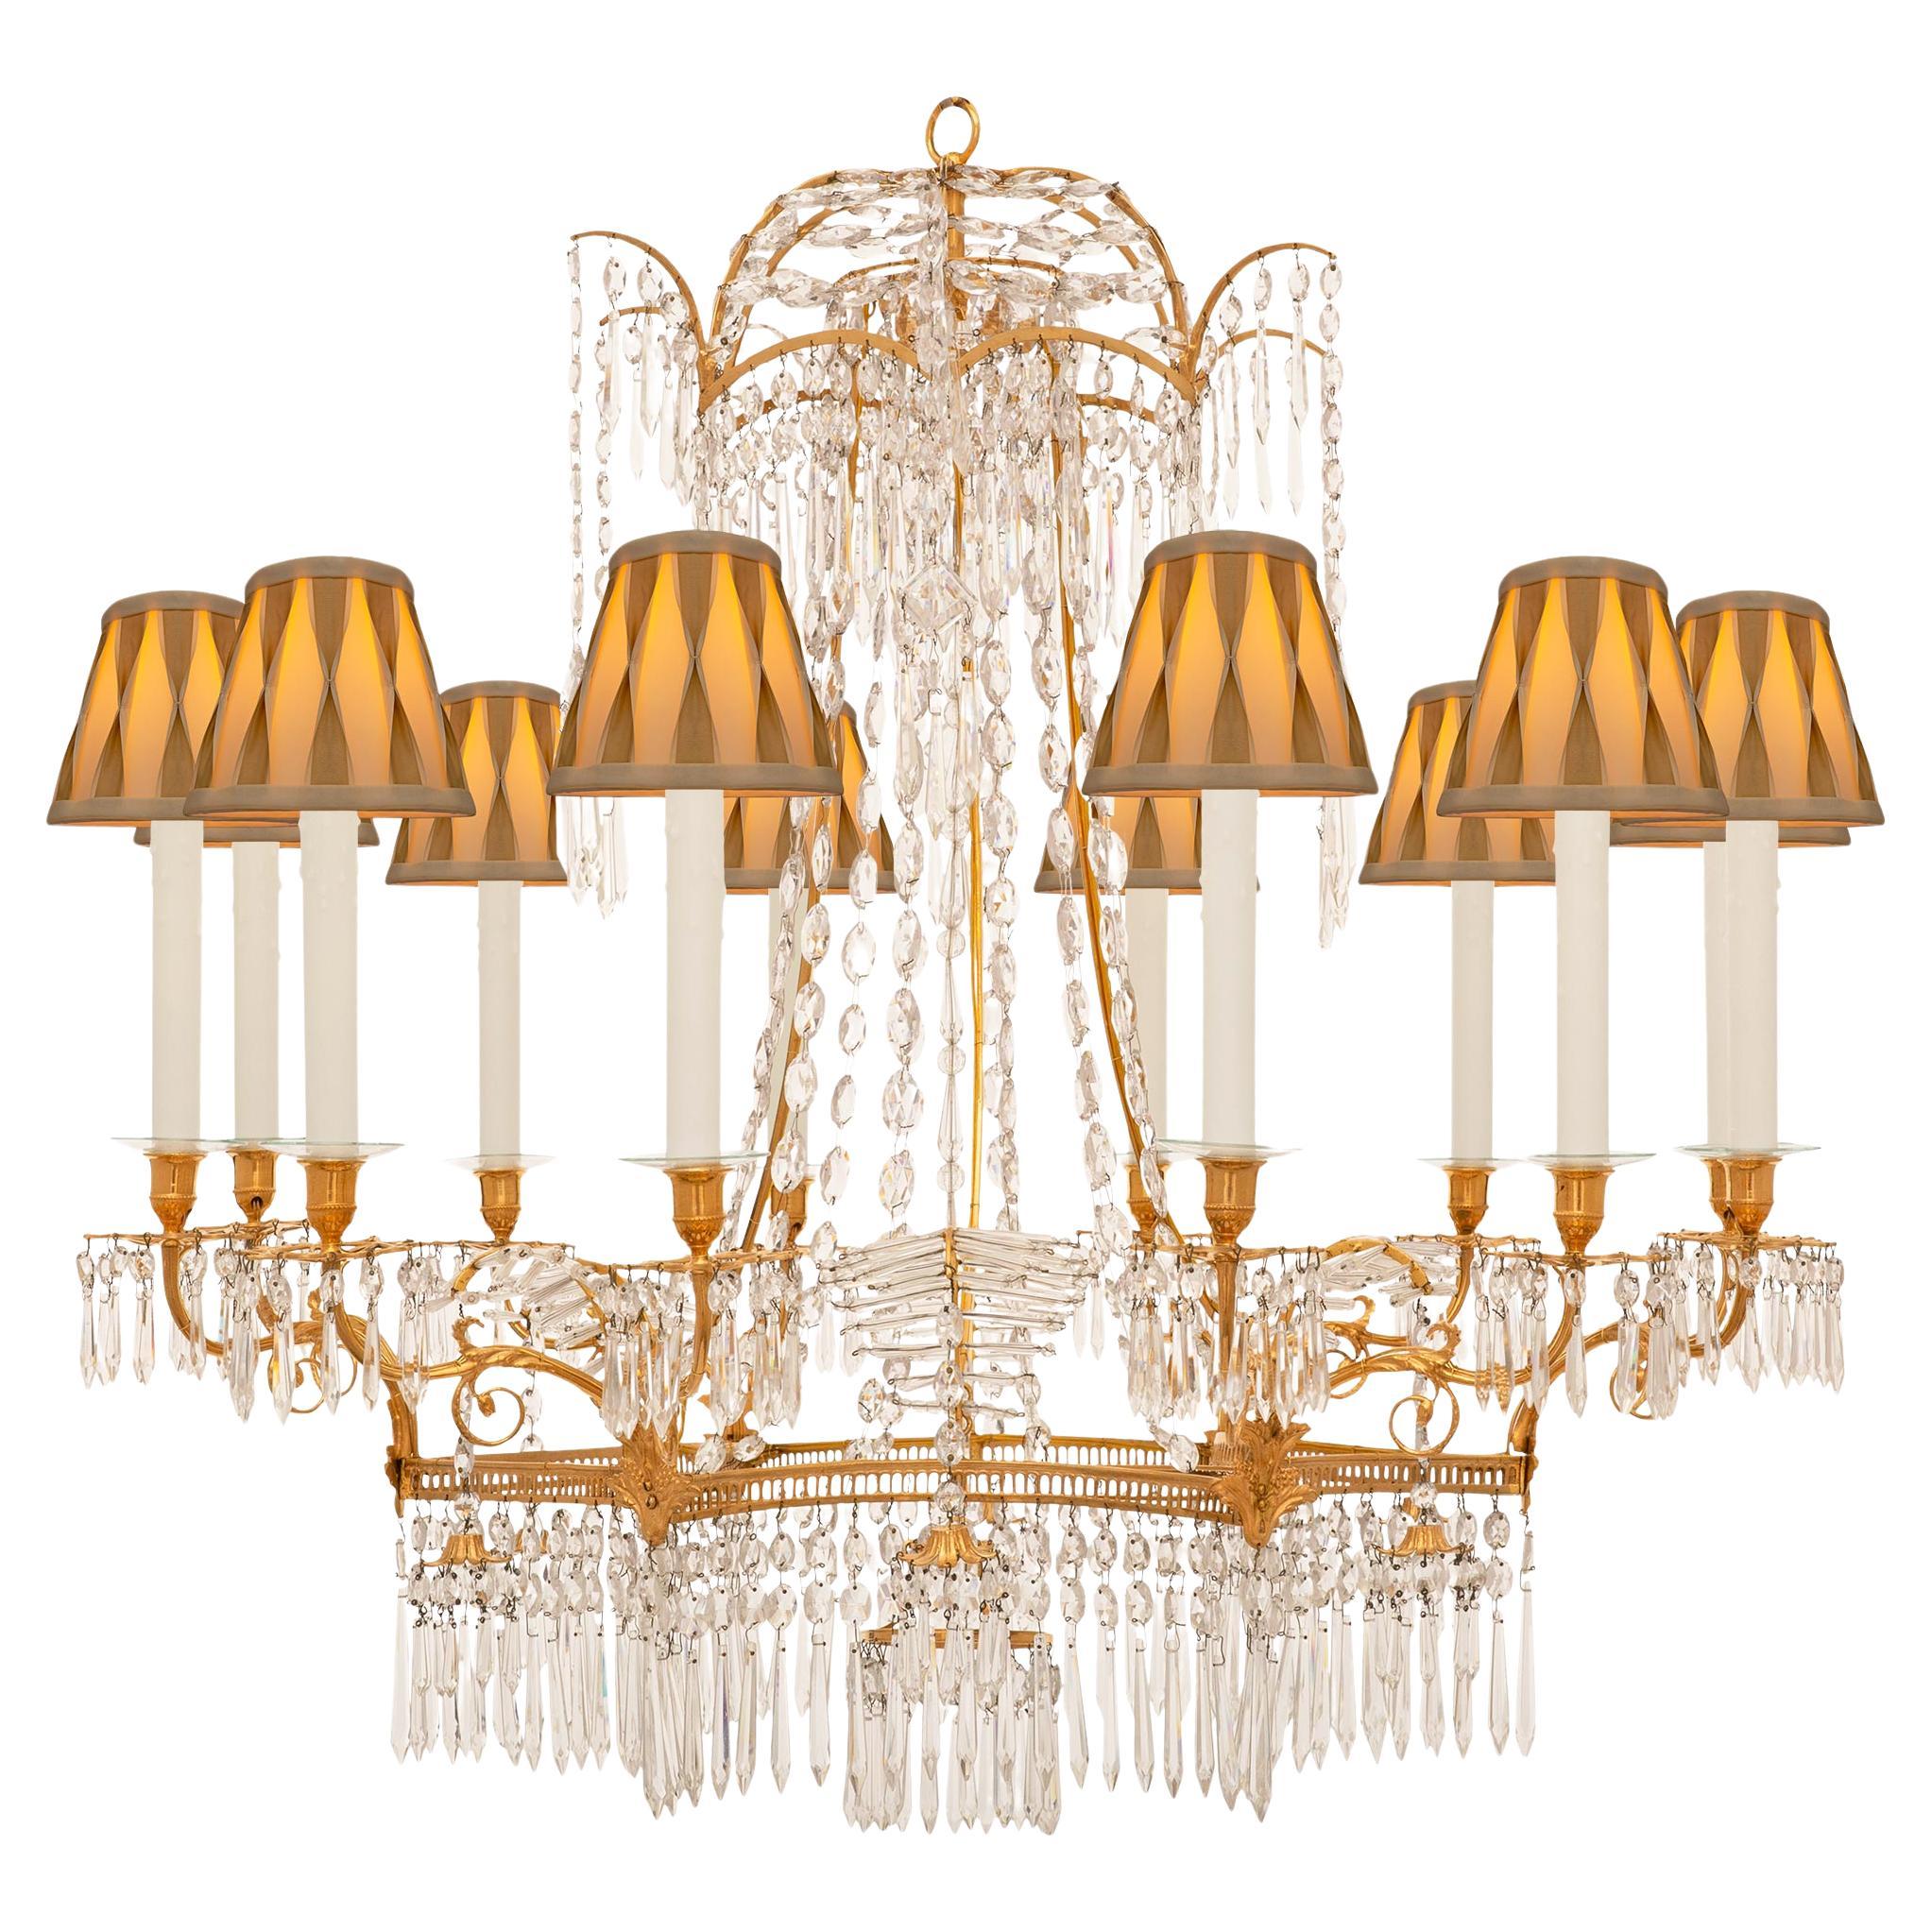 Baltic 19th century Ormolu and cut glass chandelier For Sale